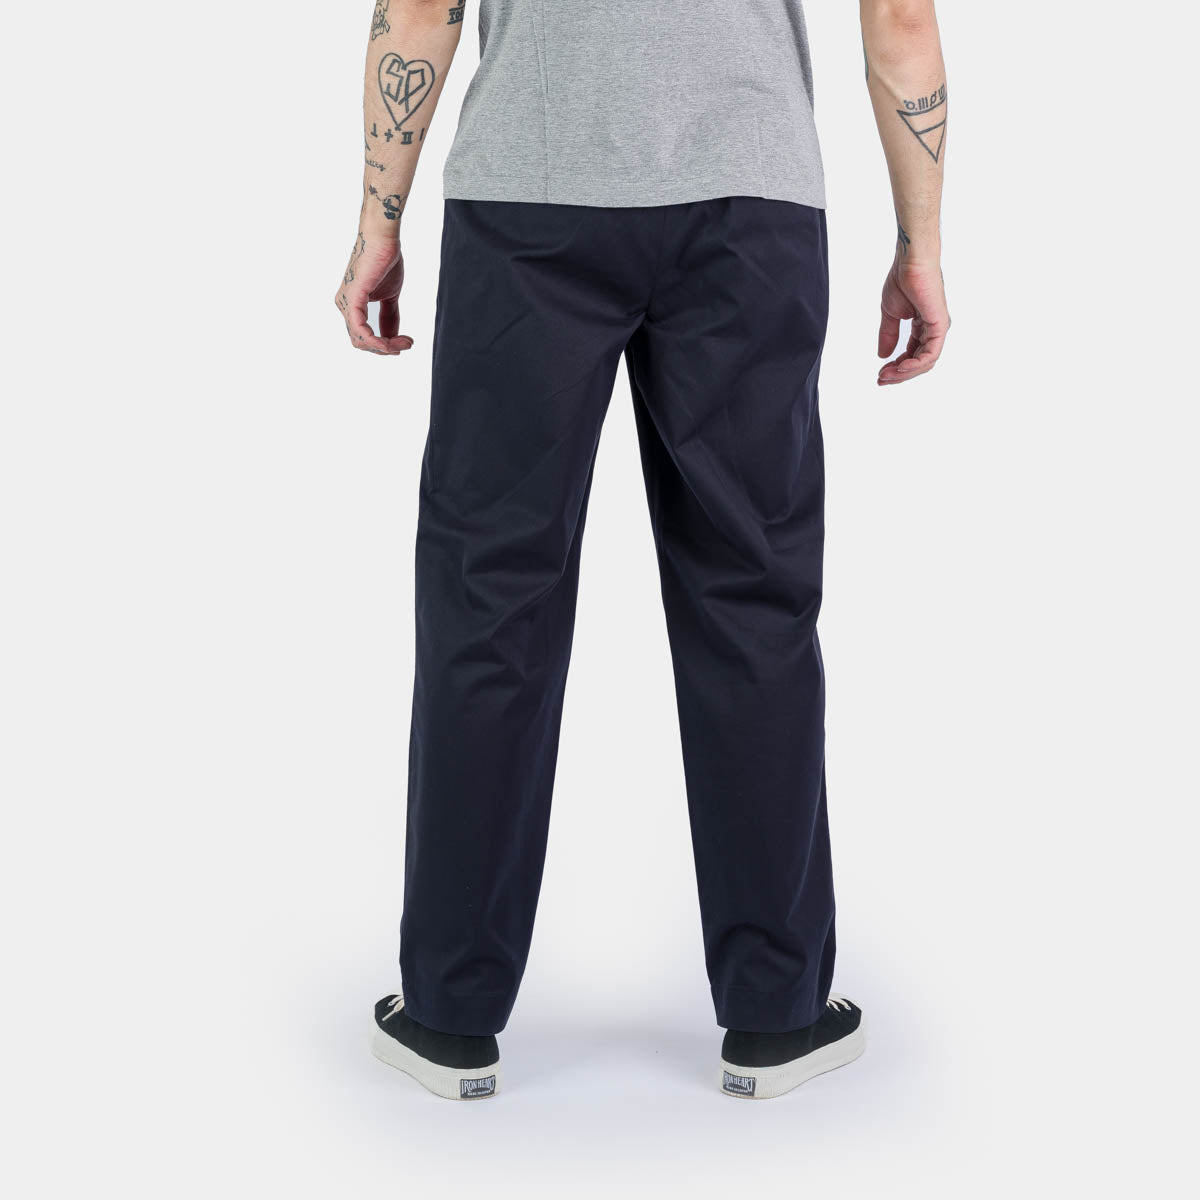 Easy Trousers - Deep Navy